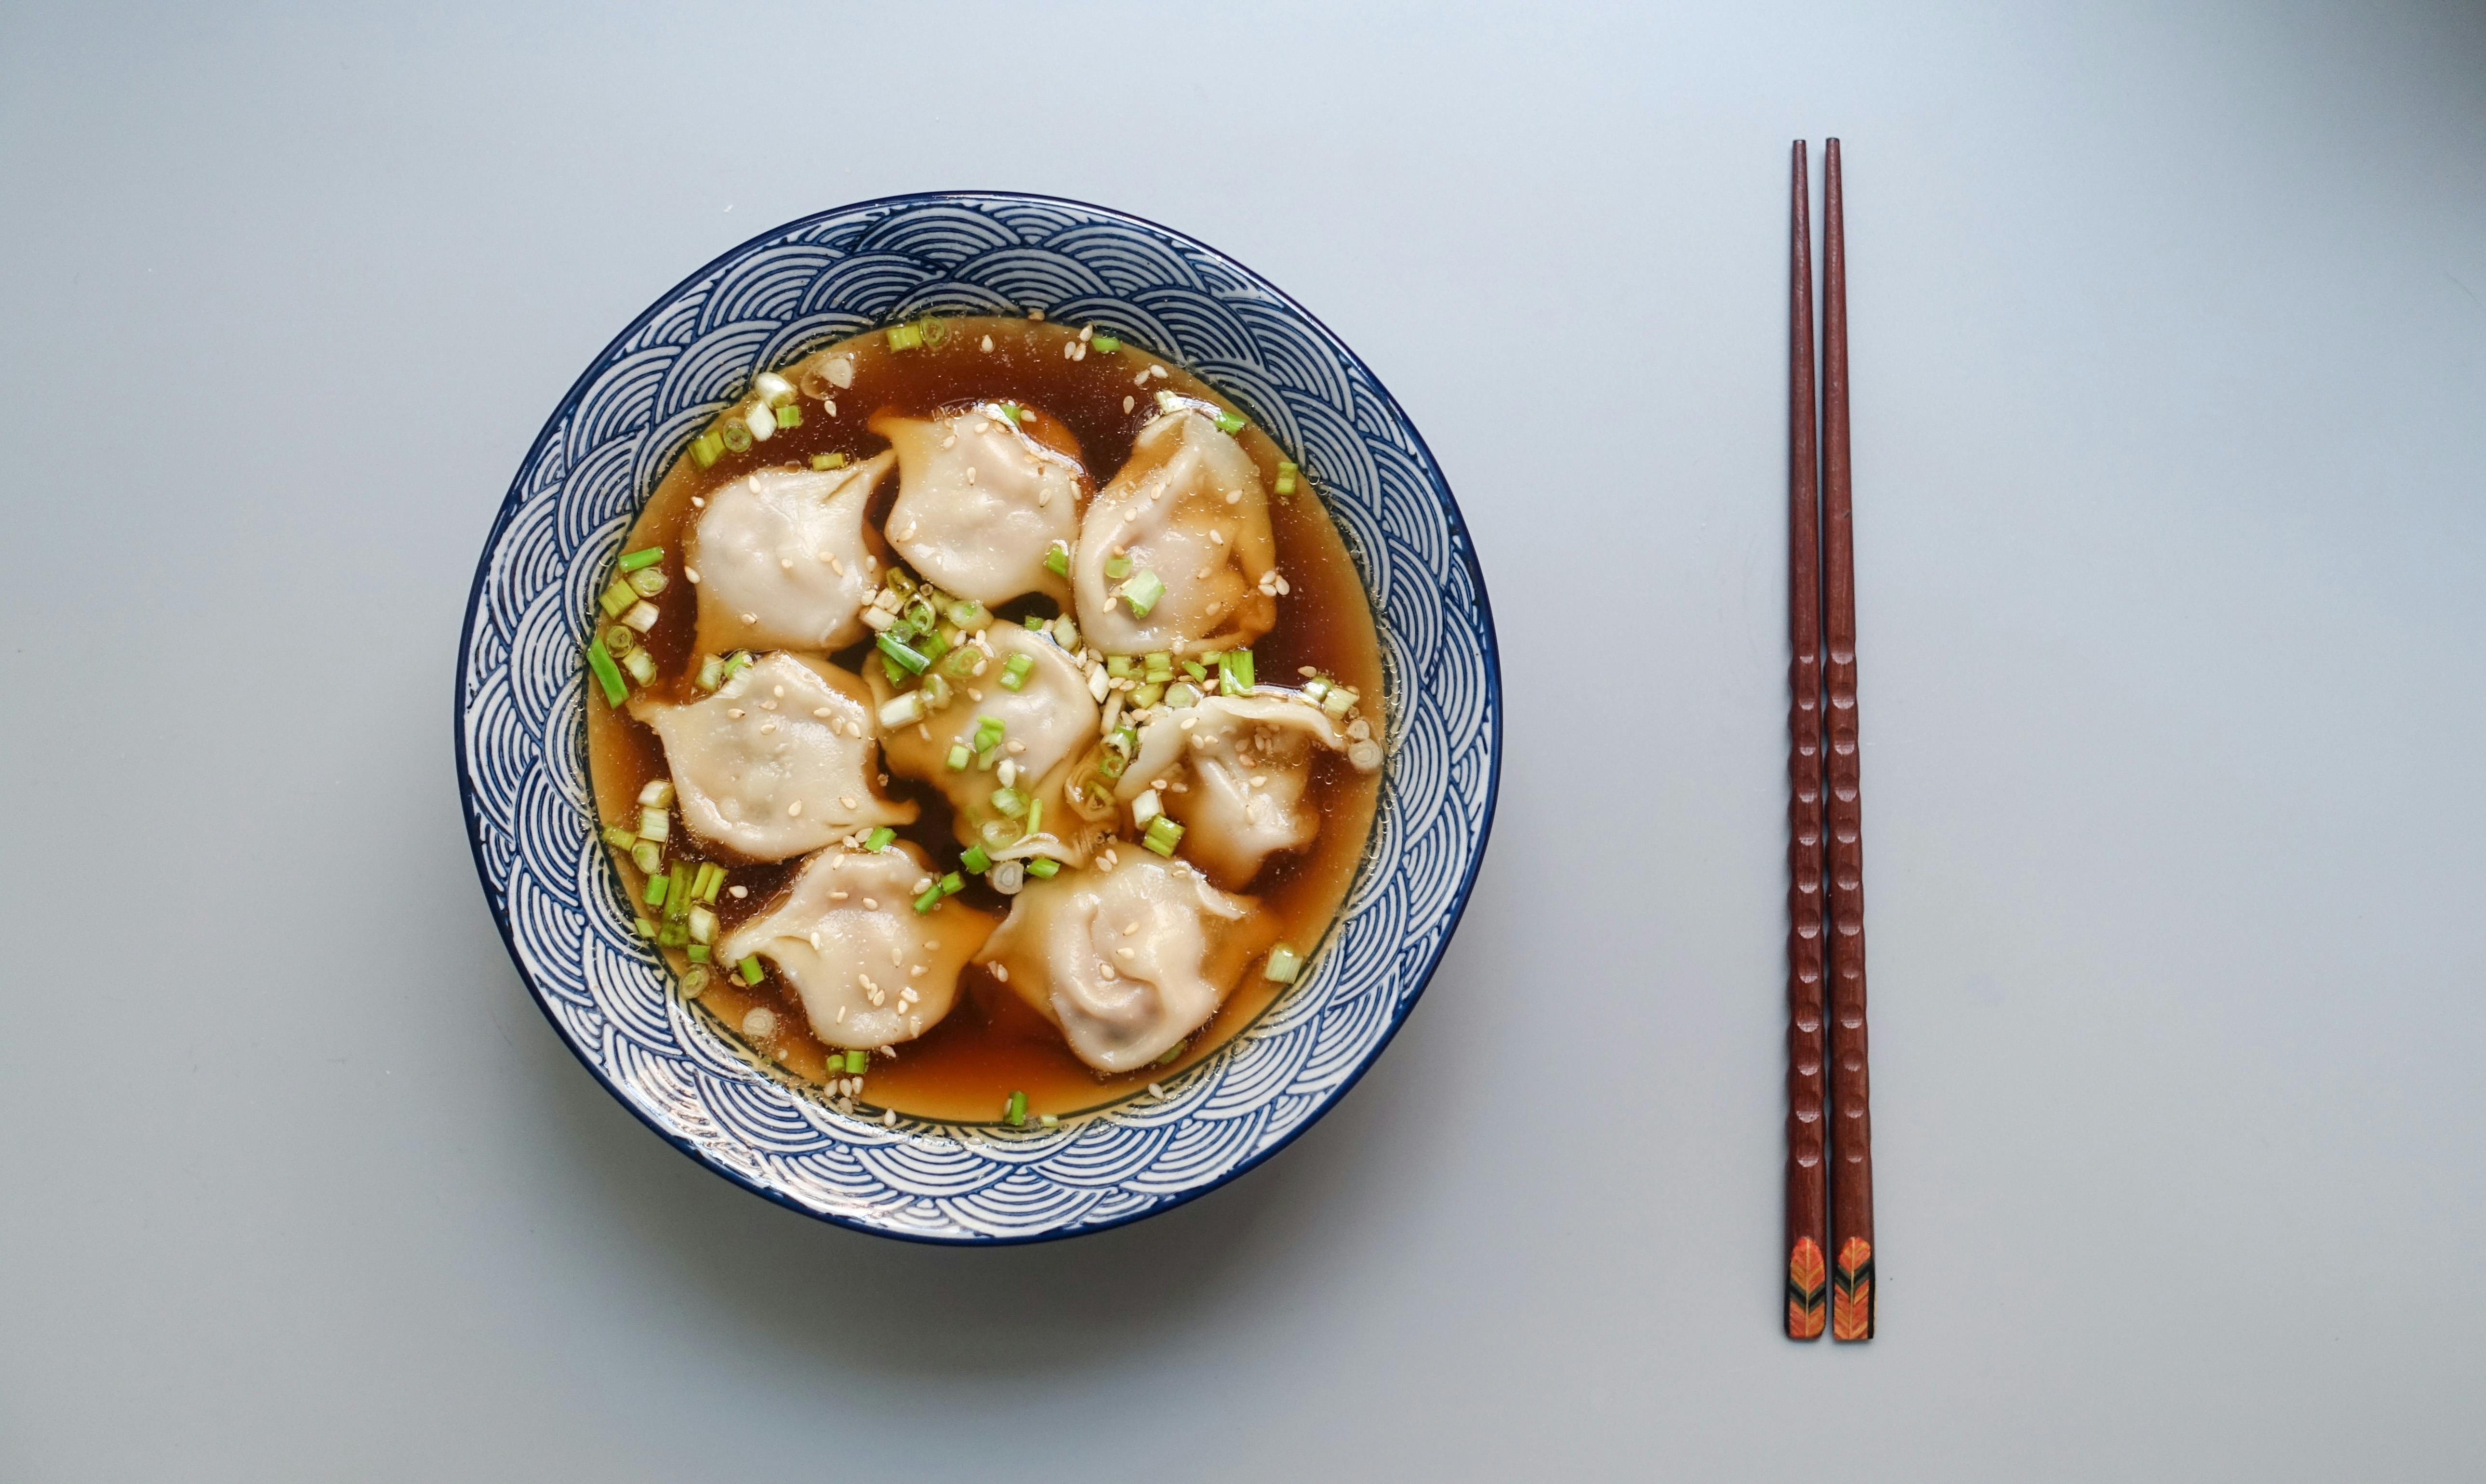 A ceramic bowl with cooked ball soup | Source: Pexels